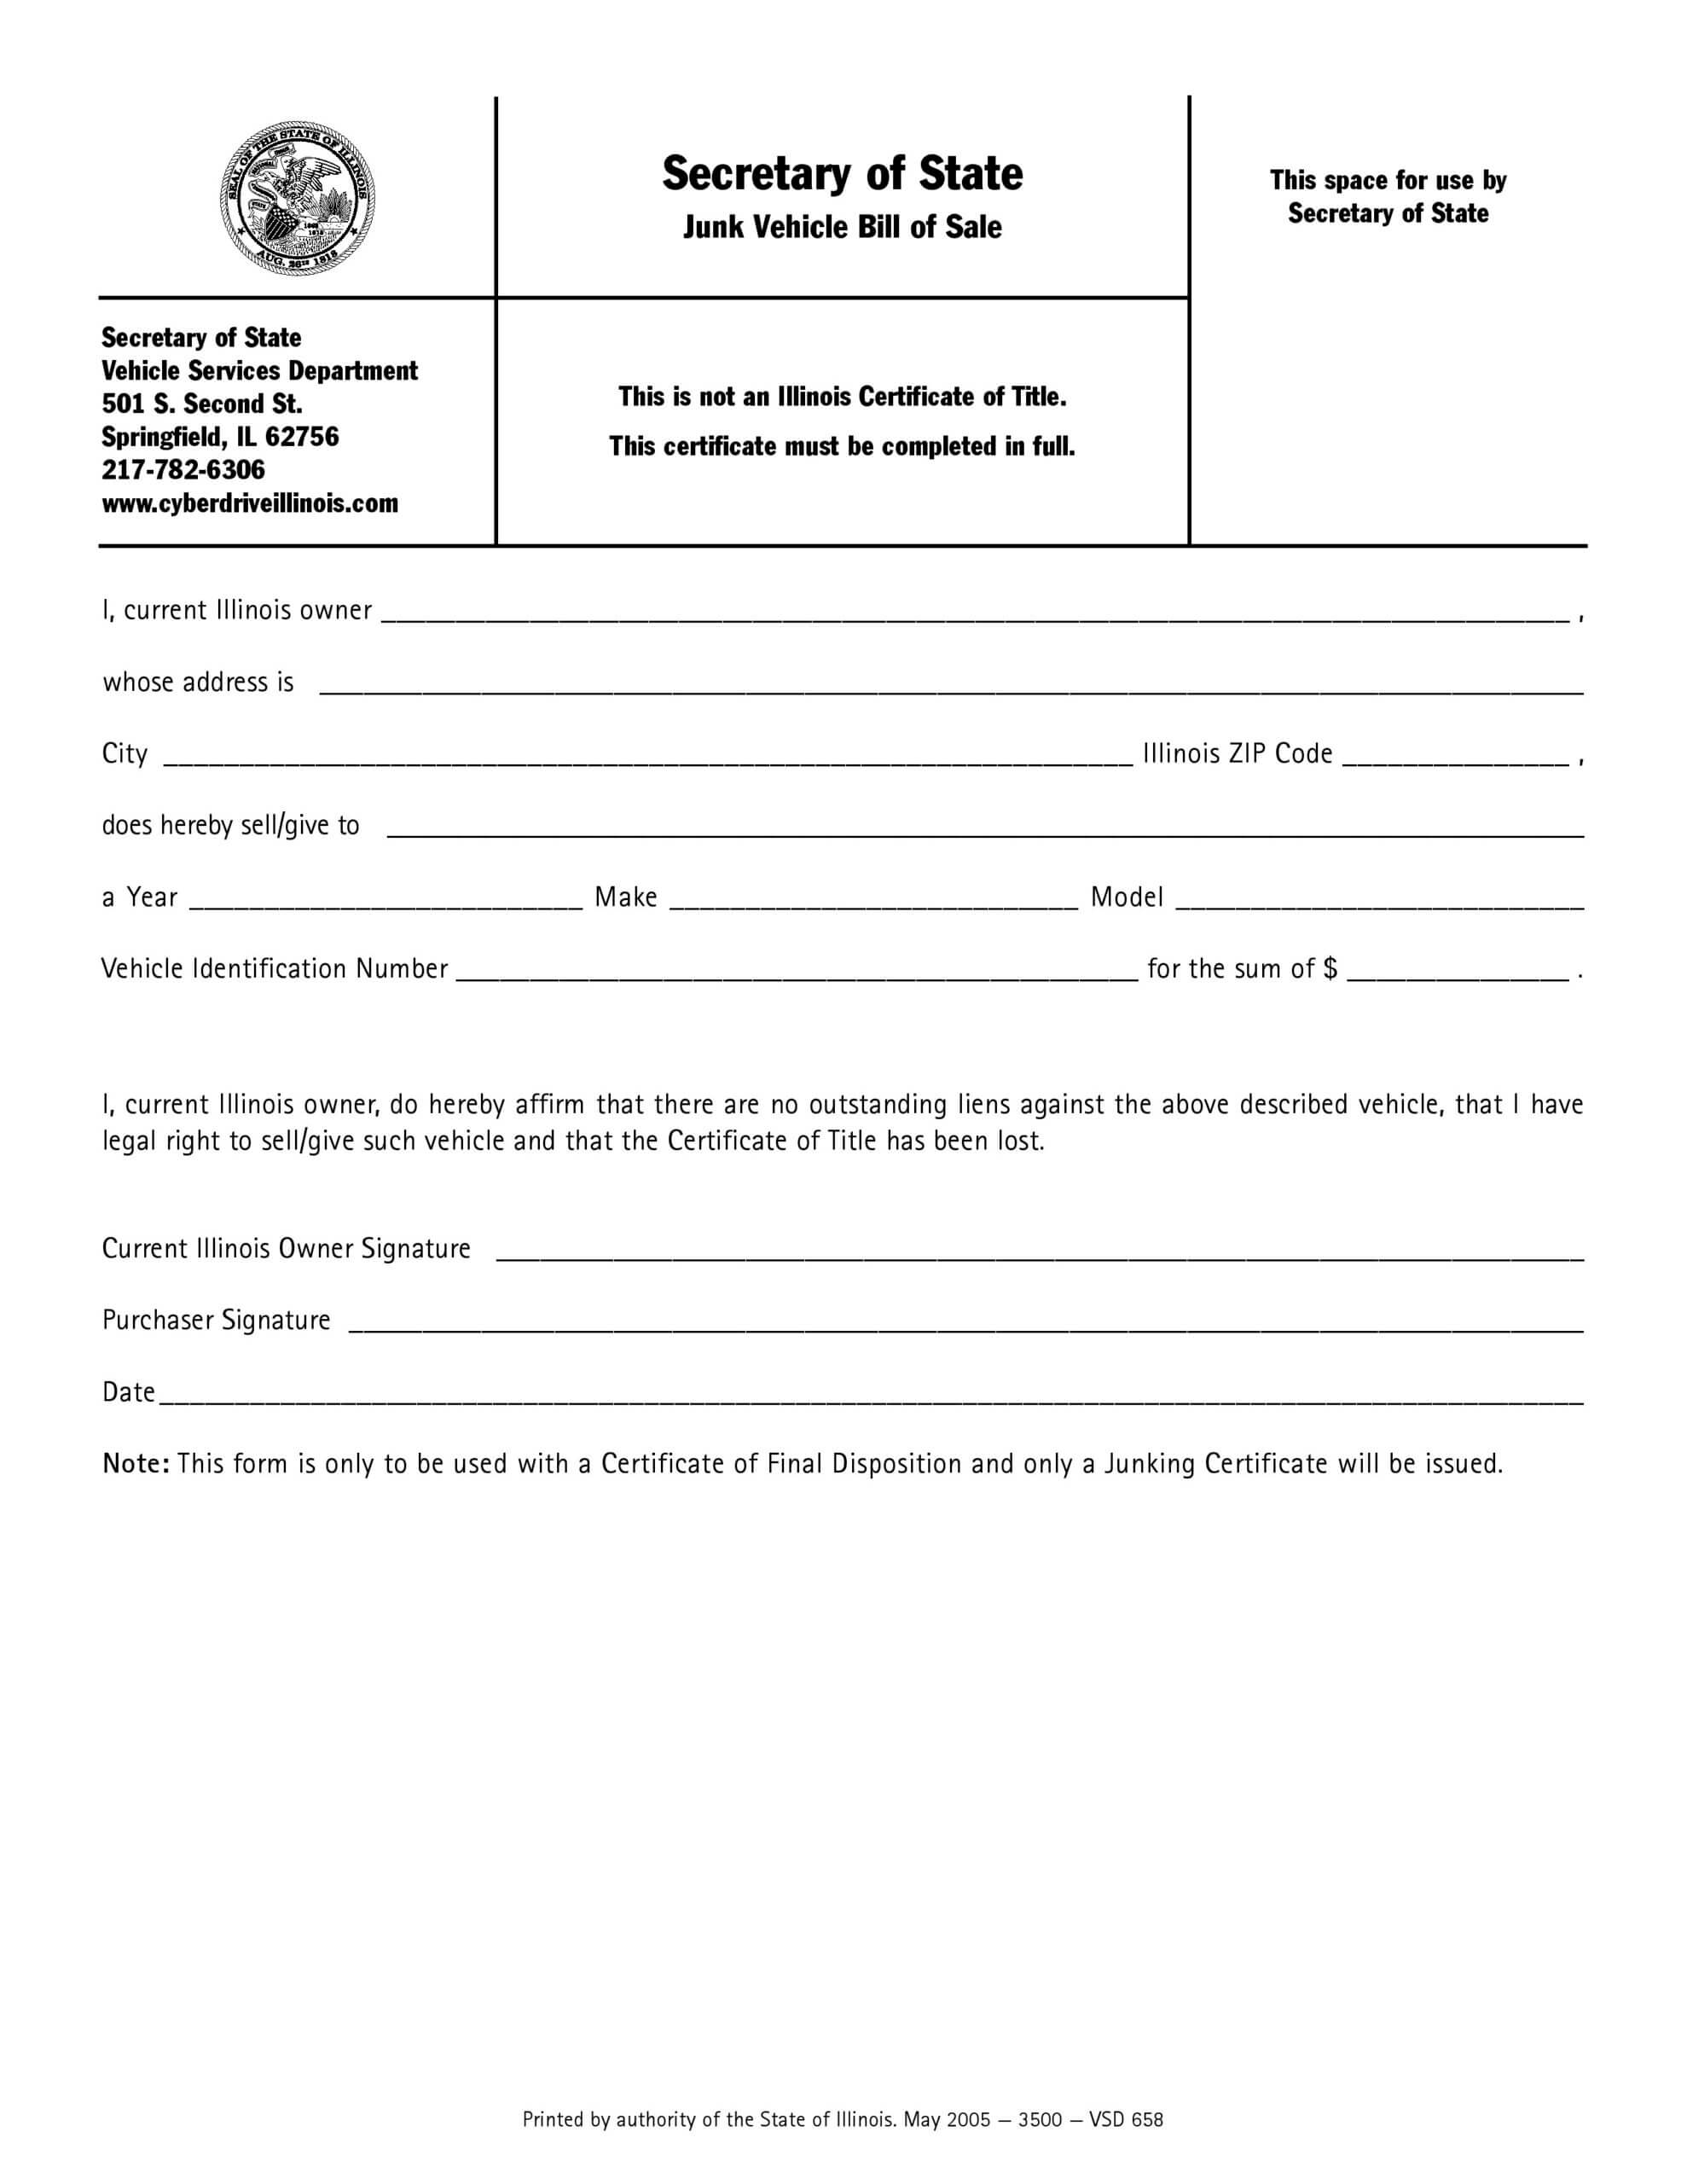 Free Illinois Junk Vehicle Bill Of Sale Form | Pdf | Word Throughout Certificate Of Disposal Template